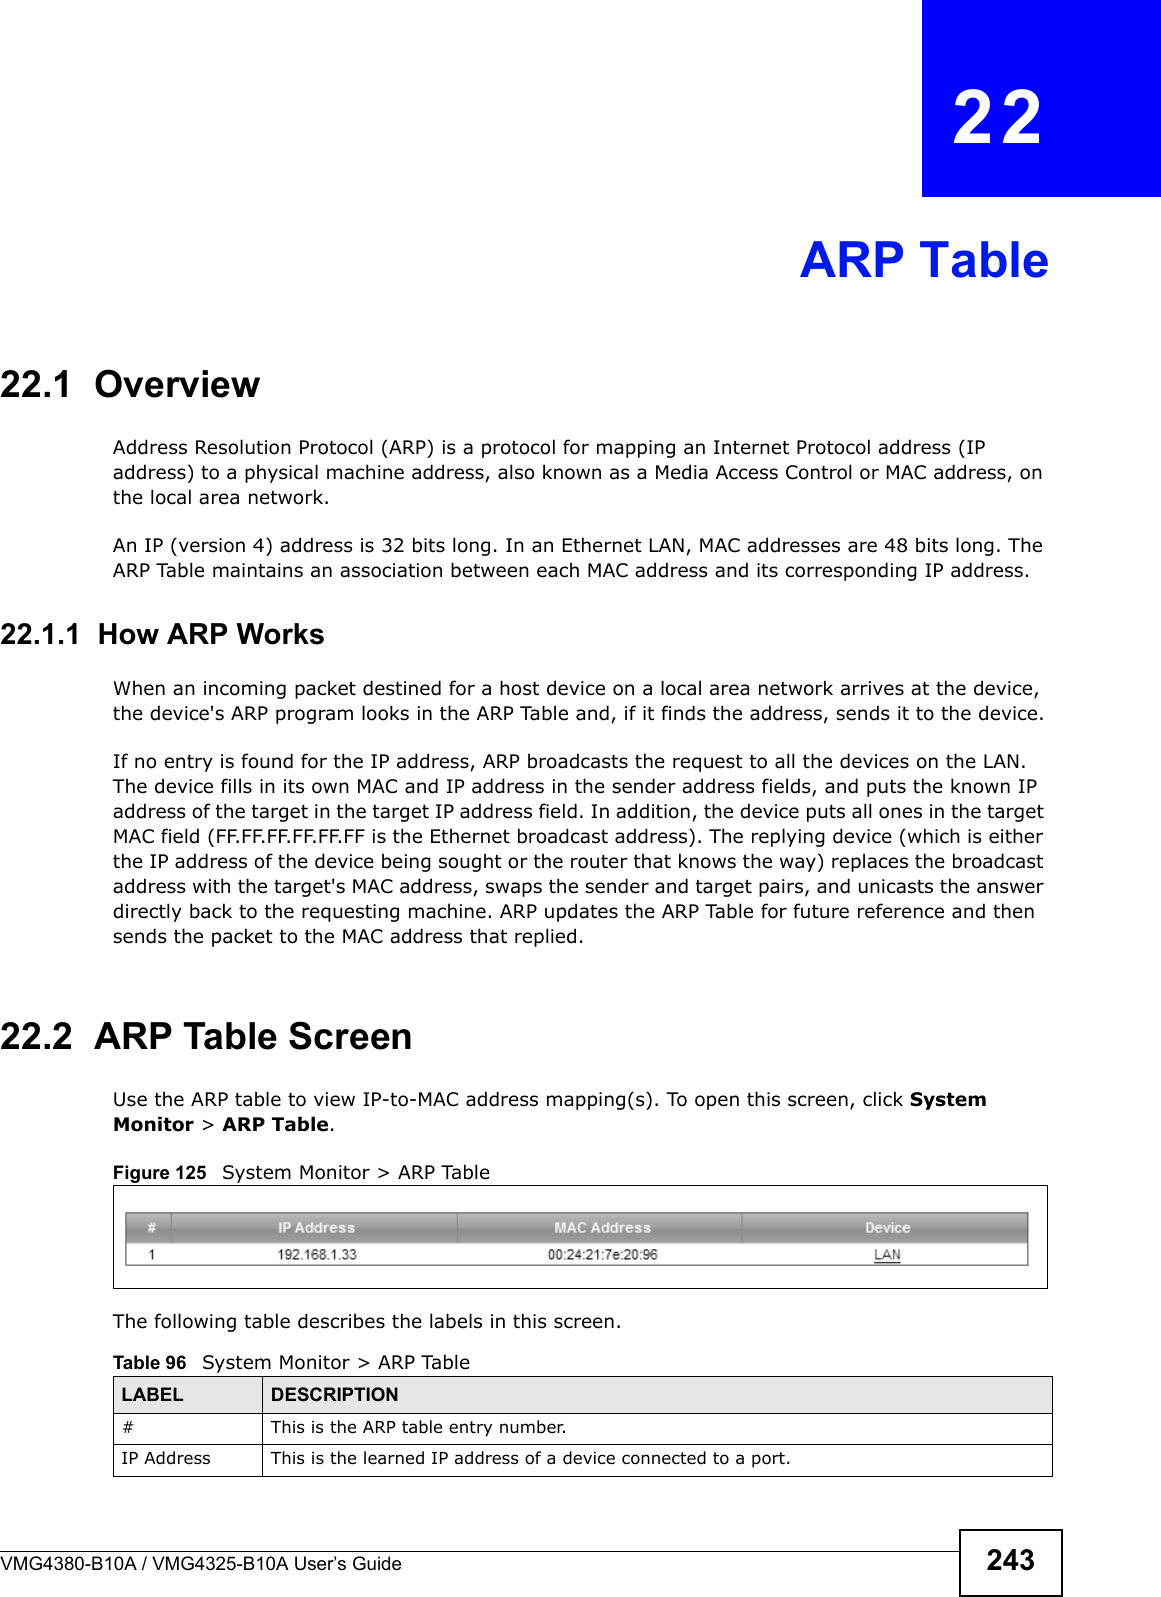 VMG4380-B10A / VMG4325-B10A User’s Guide 243CHAPTER  22ARP Table22.1  OverviewAddress Resolution Protocol (ARP) is a protocol for mapping an Internet Protocol address (IP address) to a physical machine address, also known as a Media Access Control or MAC address, on the local area network. An IP (version 4) address is 32 bits long. In an Ethernet LAN, MAC addresses are 48 bits long. TheARP Table maintains an association between each MAC address and its corresponding IP address.22.1.1  How ARP WorksWhen an incoming packet destined for a host device on a local area network arrives at the device, the device&apos;s ARP program looks in the ARP Table and, if it finds the address, sends it to the device.If no entry is found for the IP address, ARP broadcasts the request to all the devices on the LAN.The device fills in its own MAC and IP address in the sender address fields, and puts the known IP address of the target in the target IP address field. In addition, the device puts all ones in the target MAC field (FF.FF.FF.FF.FF.FF is the Ethernet broadcast address). The replying device (which is either the IP address of the device being sought or the router that knows the way) replaces the broadcast address with the target&apos;s MAC address, swaps the sender and target pairs, and unicasts the answer directly back to the requesting machine. ARP updates the ARP Table for future reference and then sends the packet to the MAC address that replied. 22.2  ARP Table ScreenUse the ARP table to view IP-to-MAC address mapping(s). To open this screen, click SystemMonitor &gt; ARP Table.Figure 125   System Monitor &gt; ARP TableThe following table describes the labels in this screen.Table 96   System Monitor &gt; ARP TableLABEL DESCRIPTION# This is the ARP table entry number.IP Address This is the learned IP address of a device connected to a port.